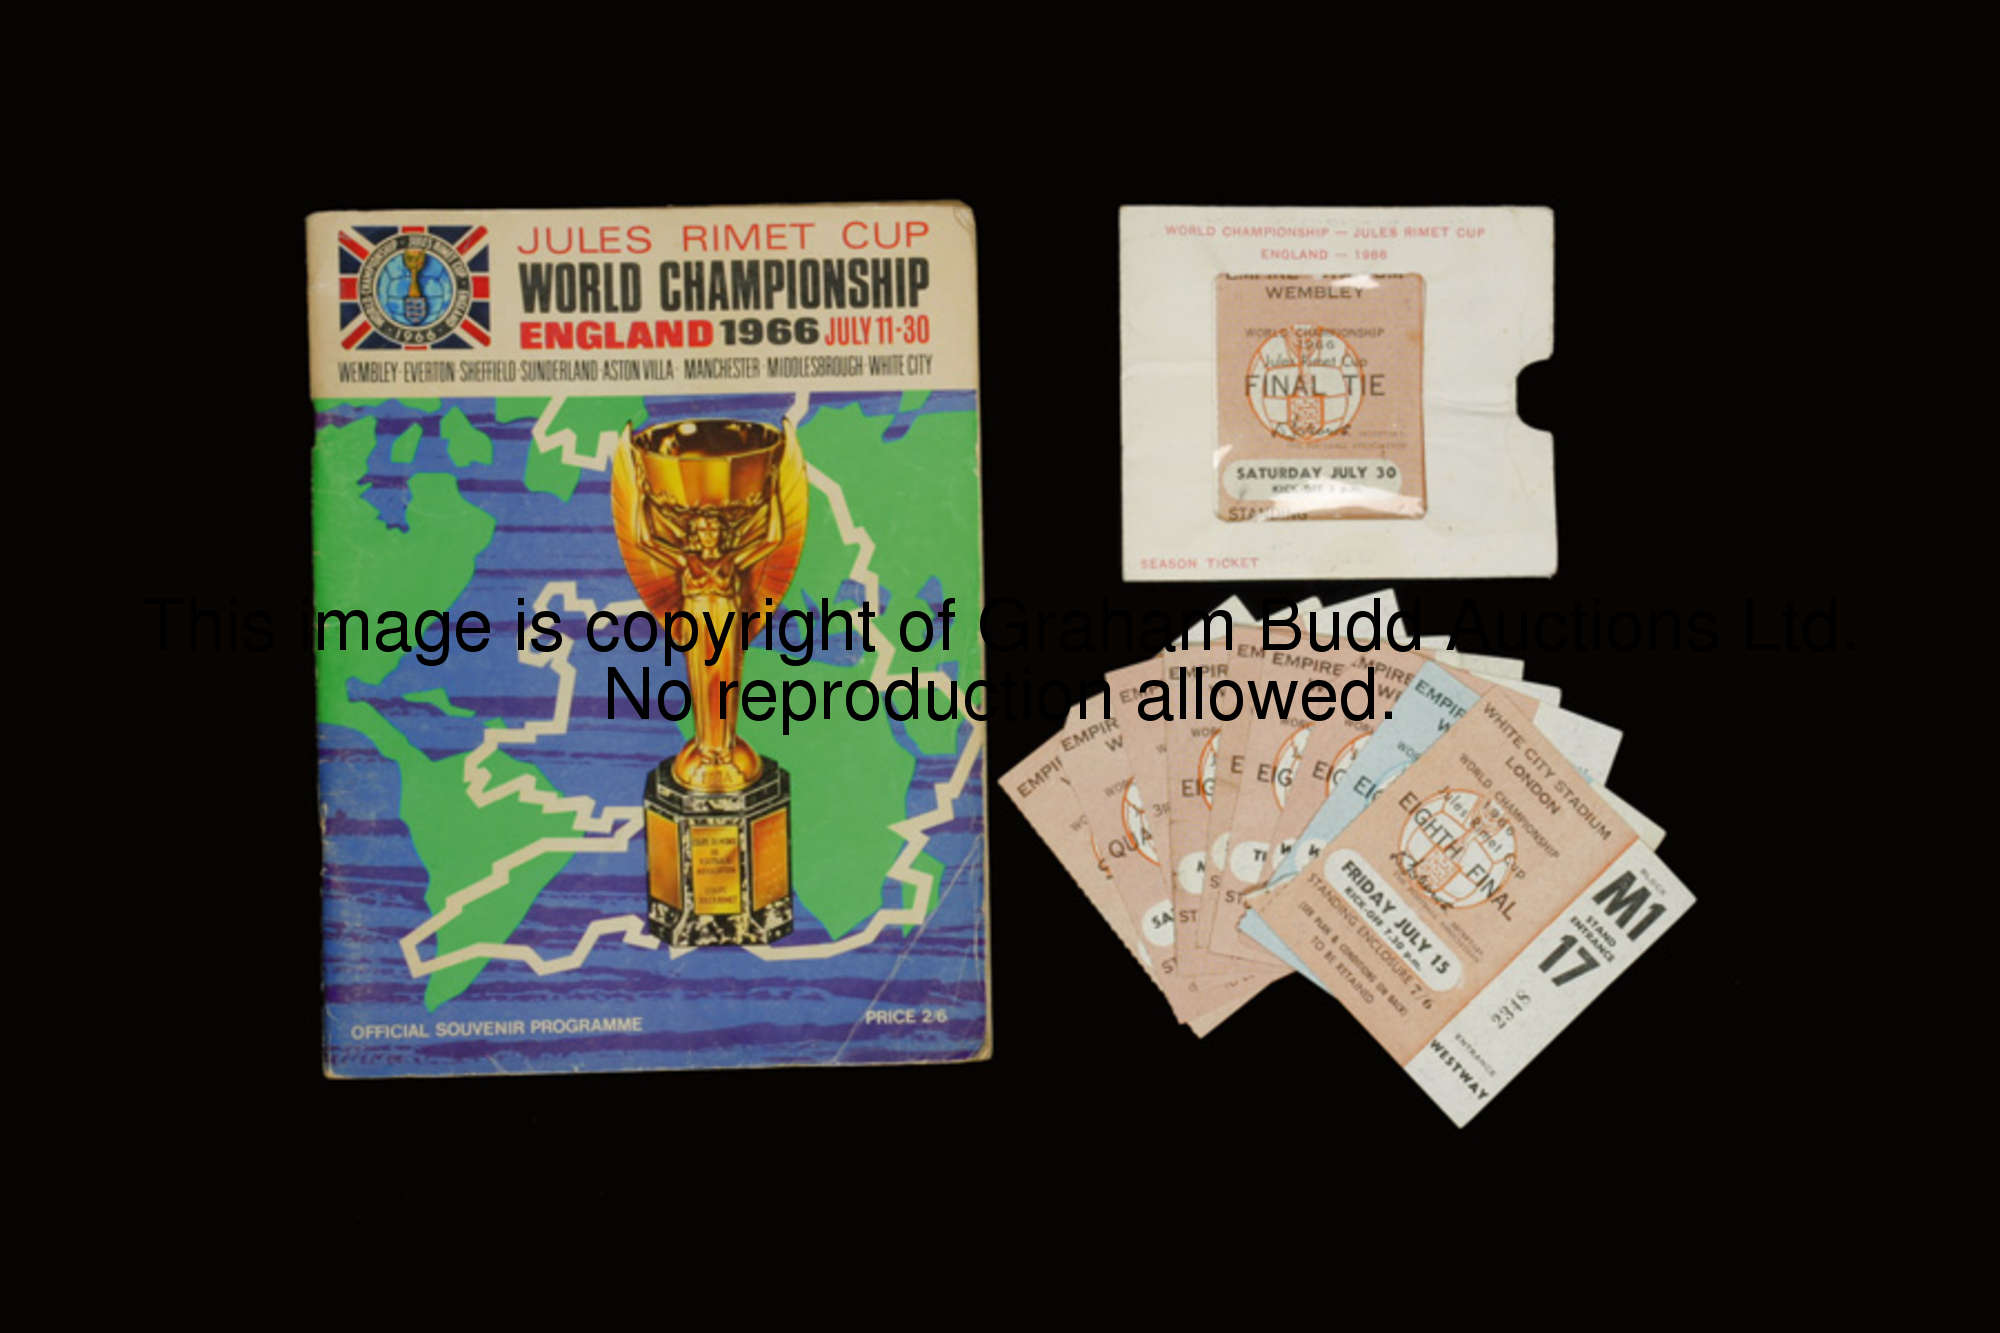 A set of 10 1966 World Cup ticket stubs, for the London matches, 6 x 1/8f, 1/4f, s/f, 3rd/4th & fina...